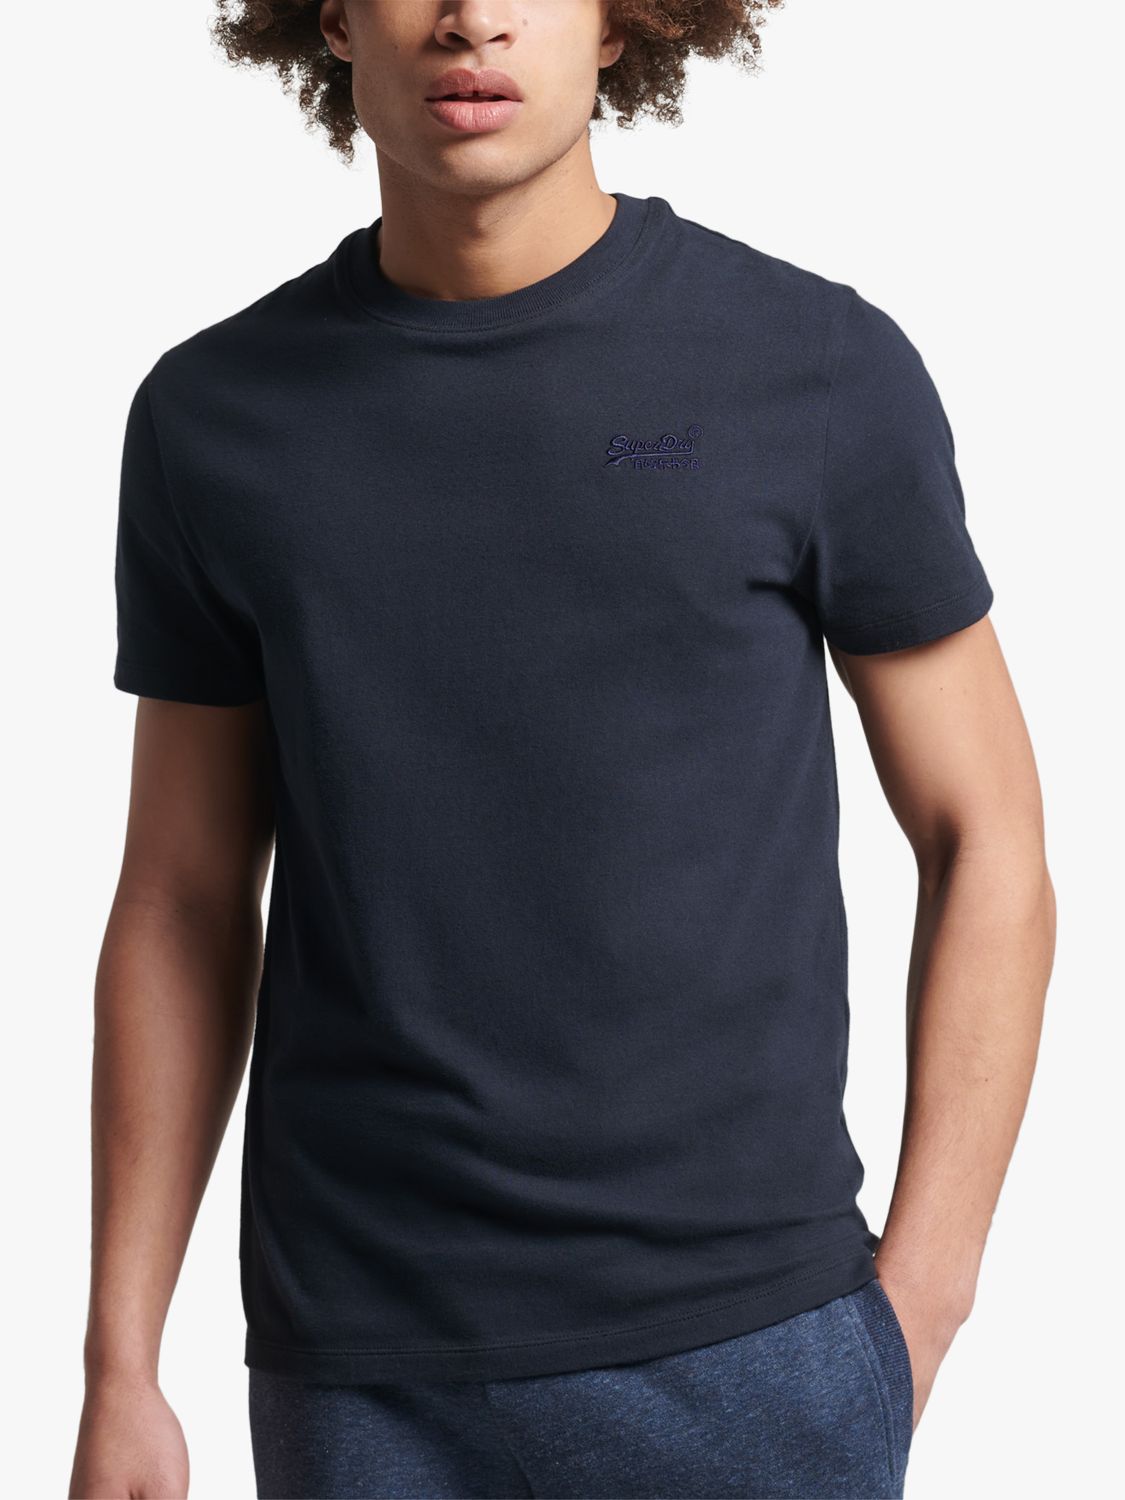 Men's - Organic Cotton Vintage Logo Embroidered Henley Top in Eclipse Navy